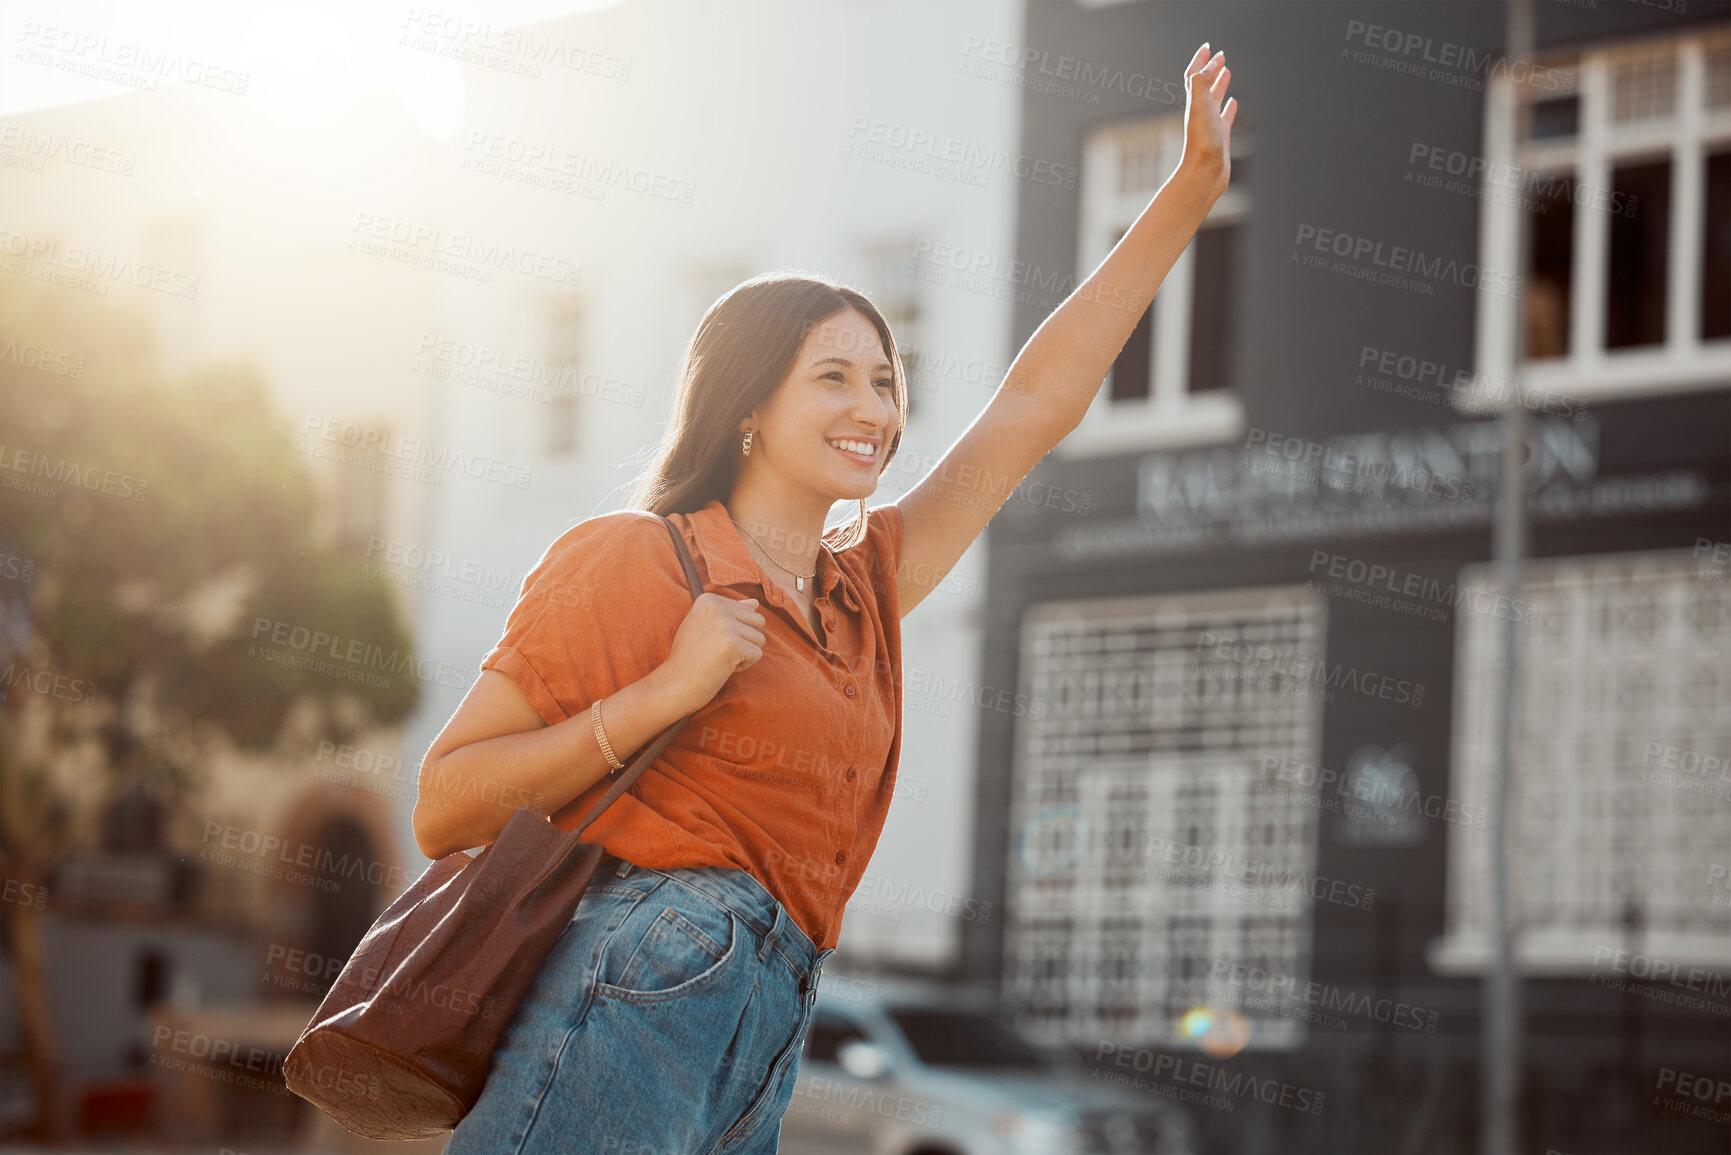 Buy stock photo Waving for a taxi, waiting in the street for a ride outside.  Smiling urban woman wants to travel downtown for work or fun with a cab. Lady gestures for transportation with confident arm raised.